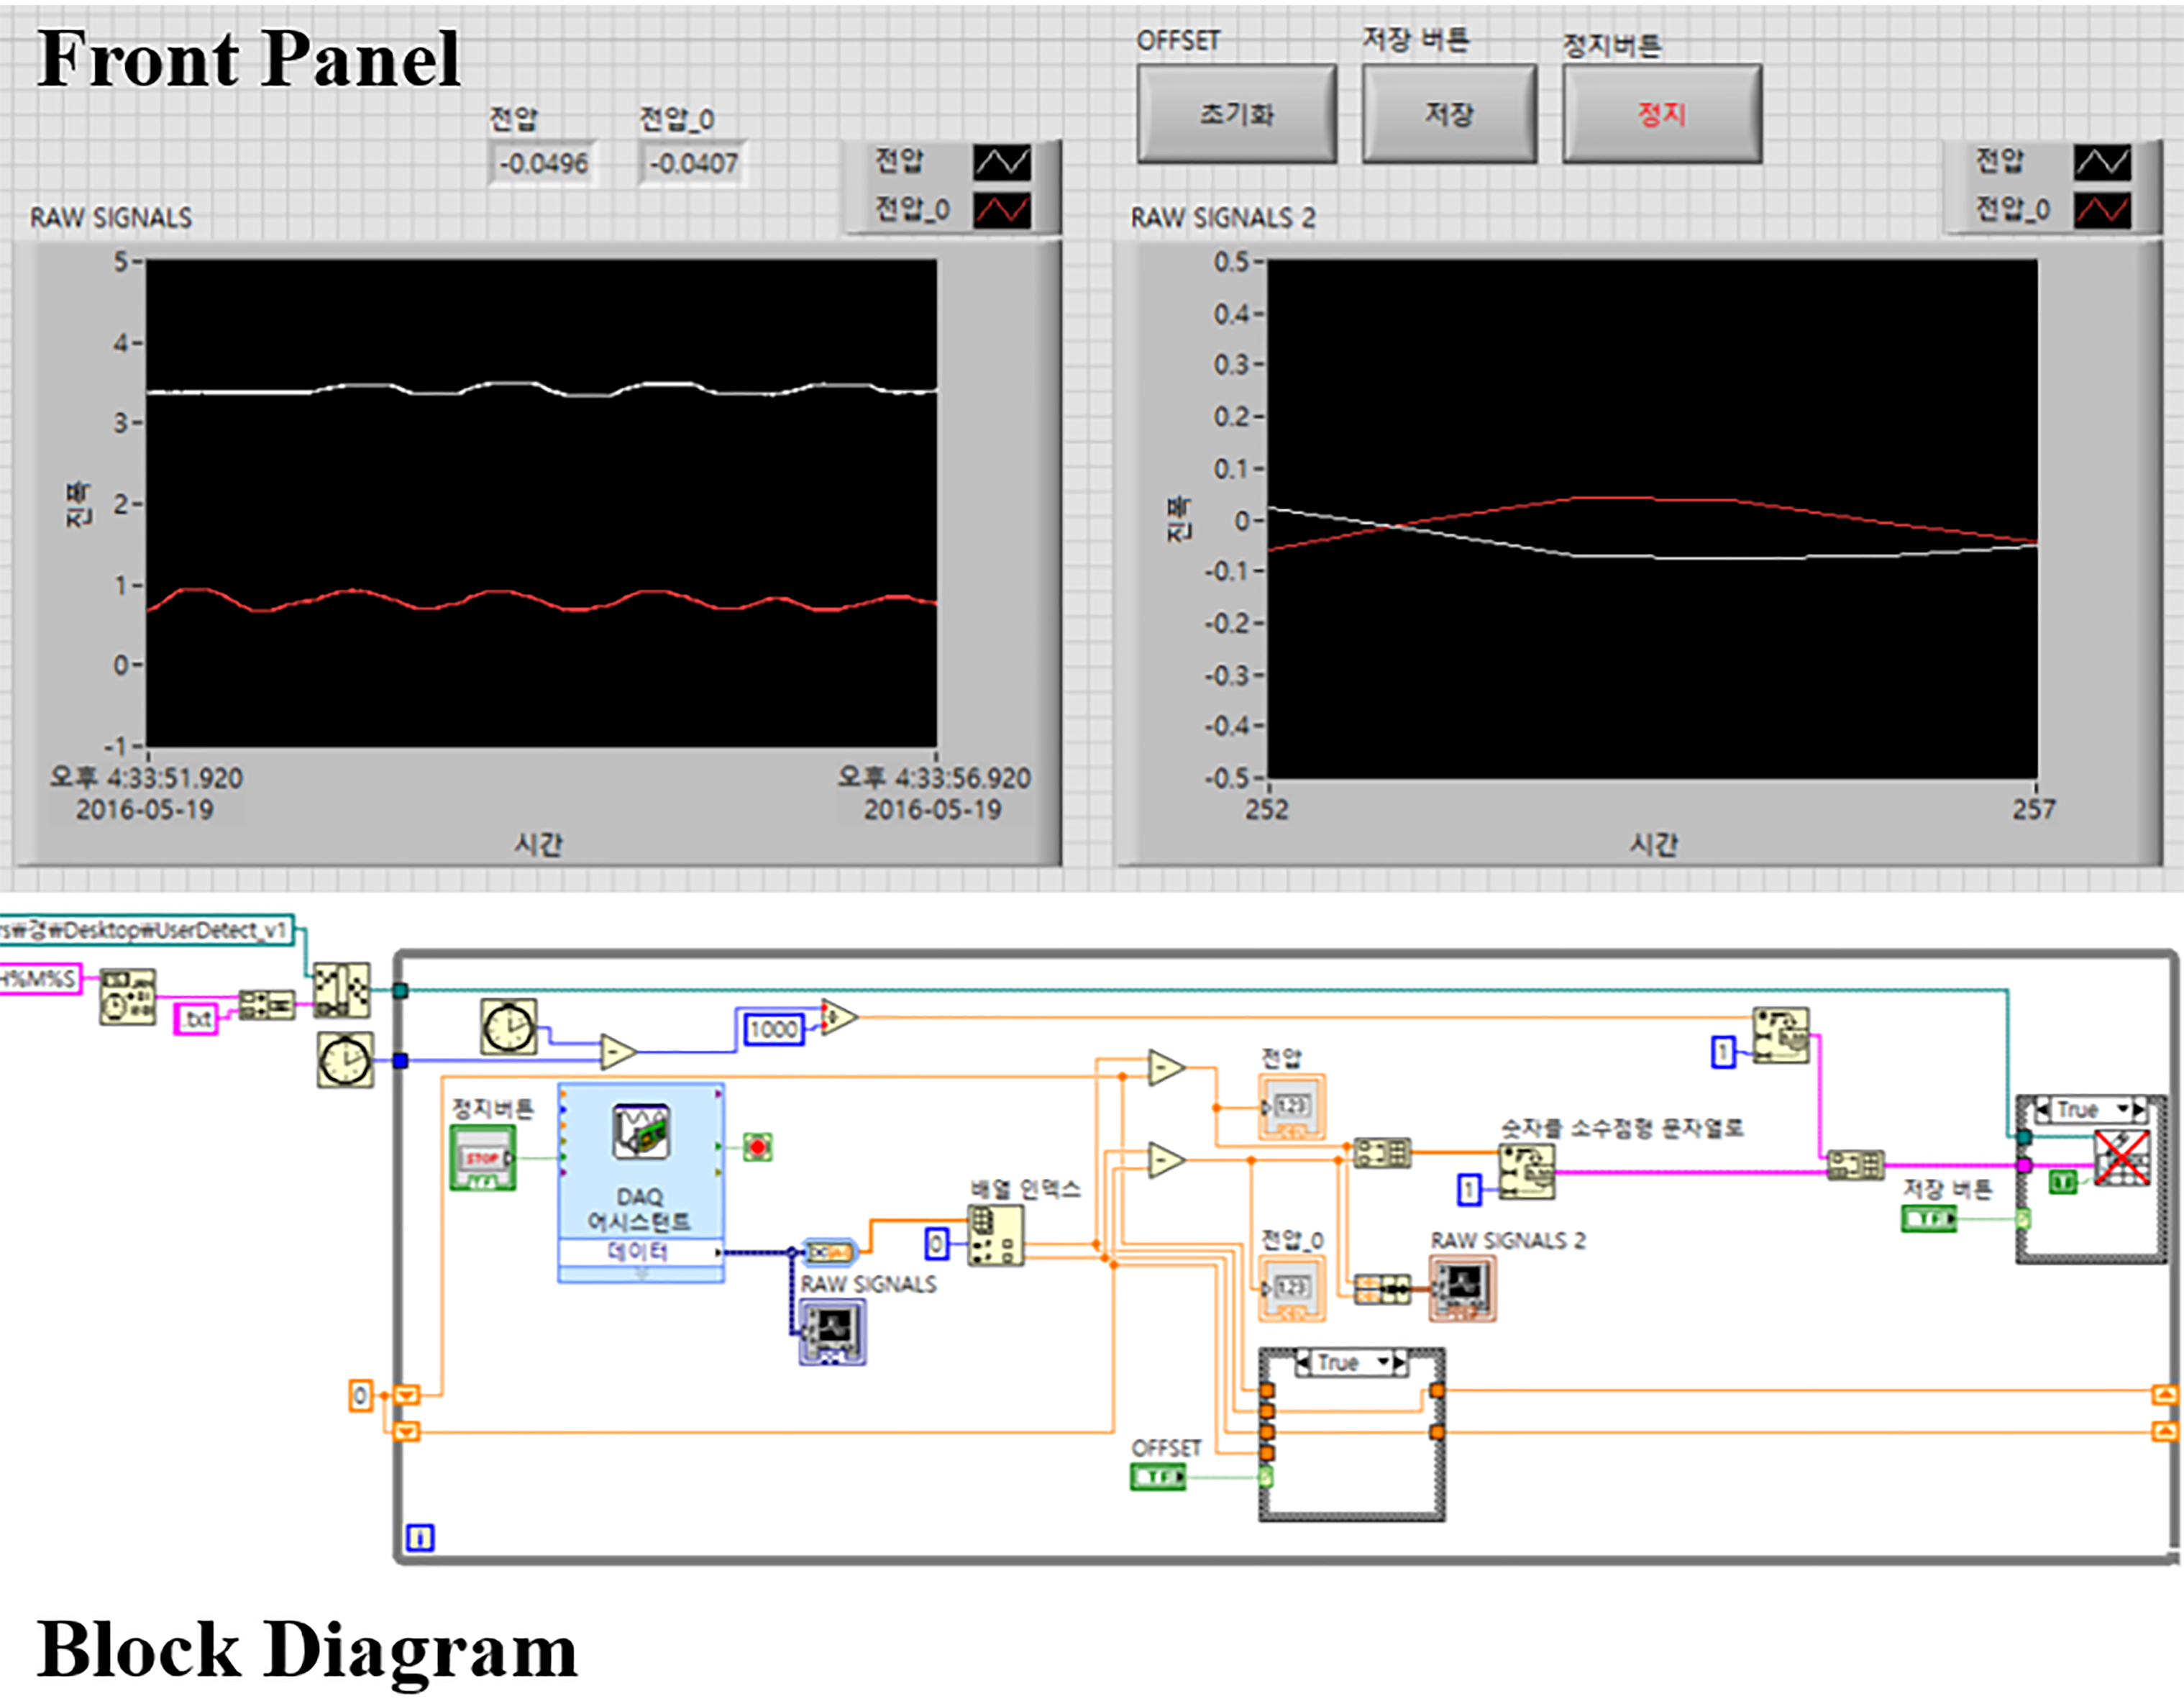 LabVIEW program for data acquisition.